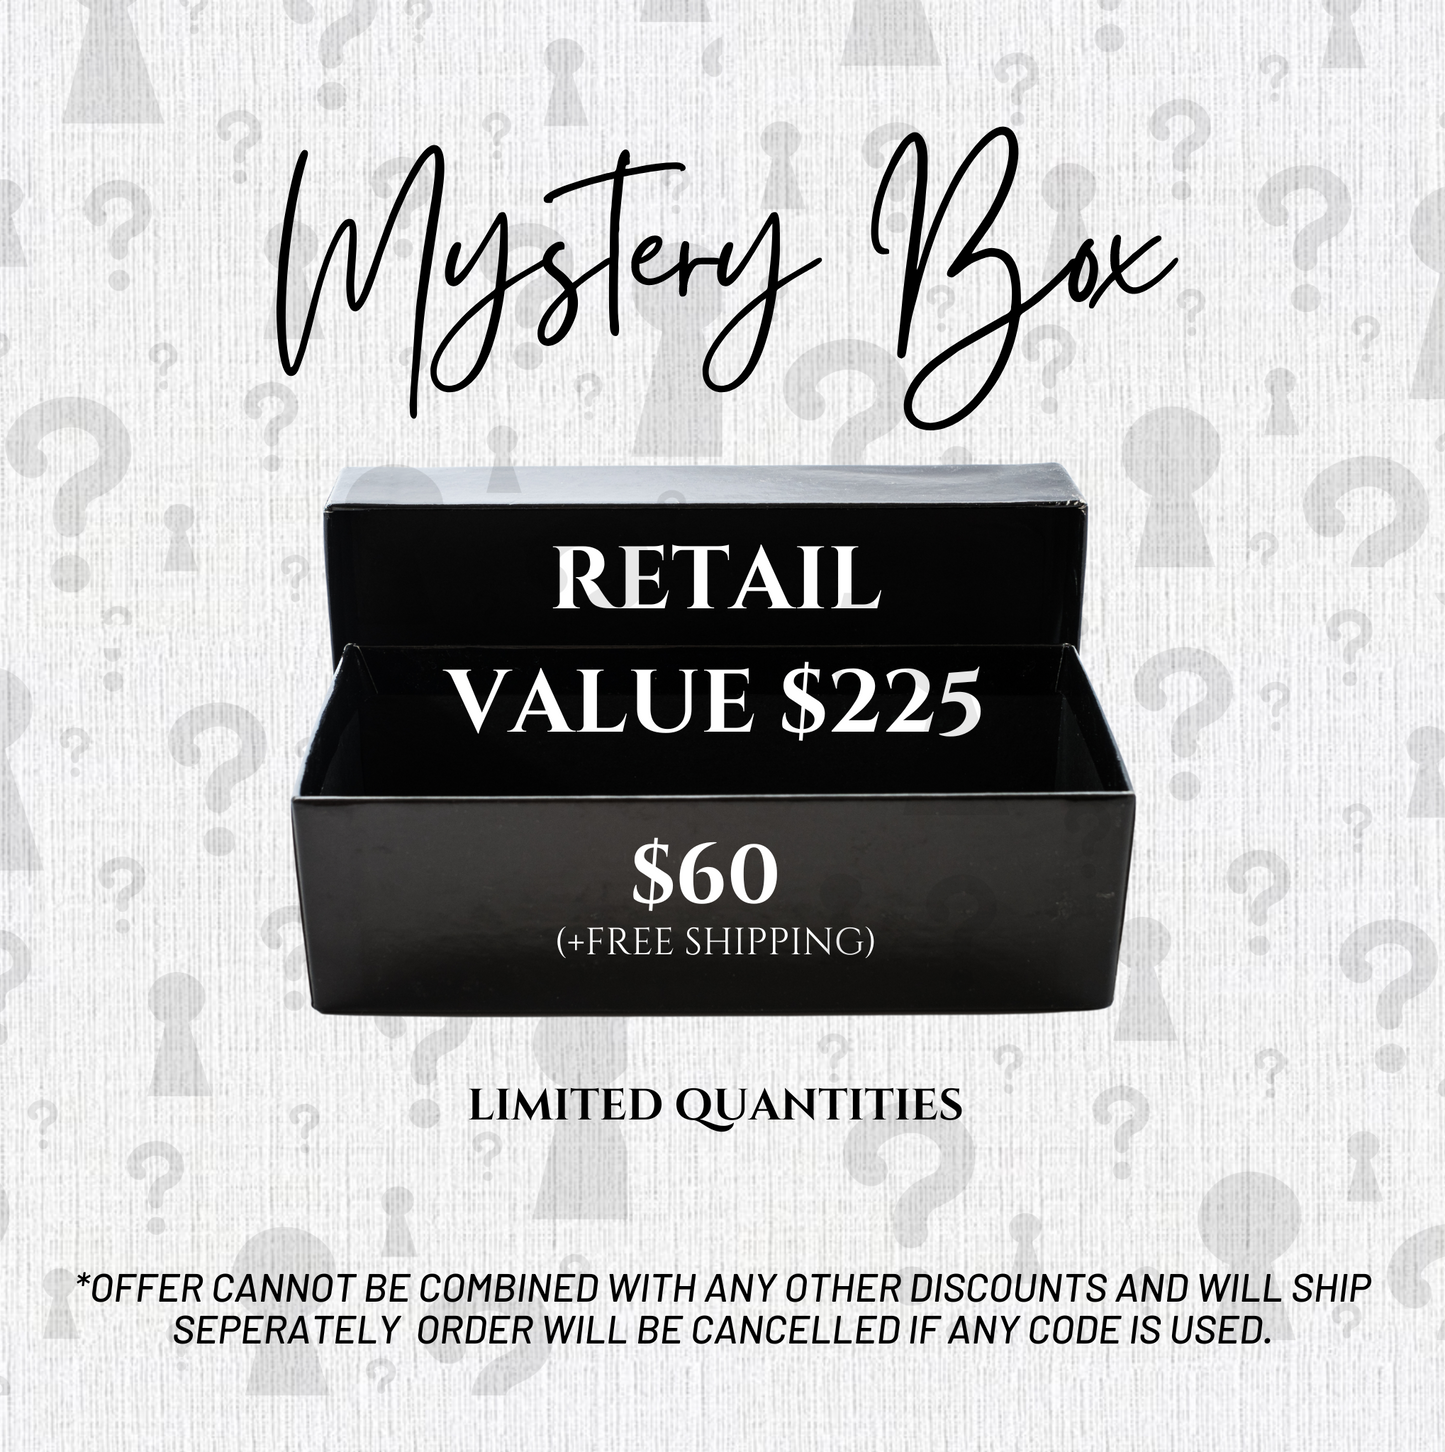 Surprise Mystery Box - *READ DESCRIPTION* MUST BE ORDERED SEPERATELY